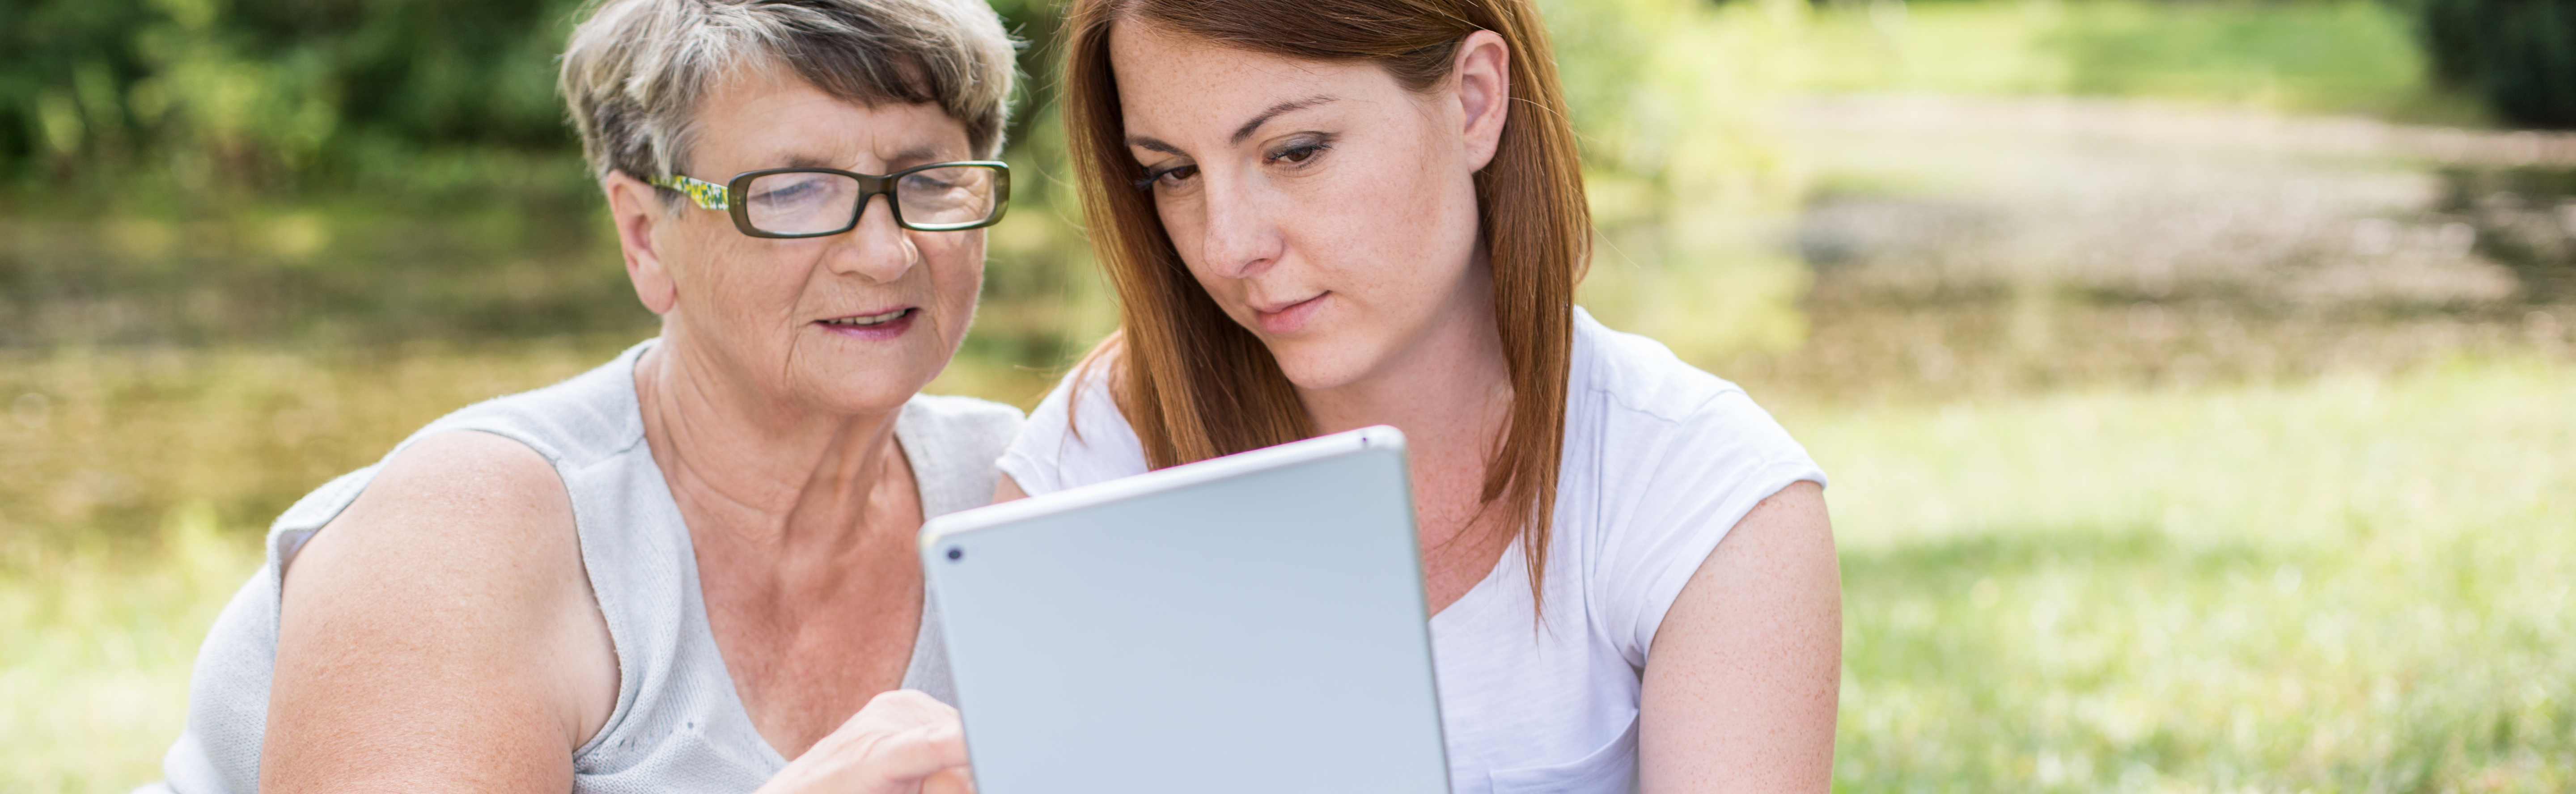 Young woman teaching grandma how to use tablet